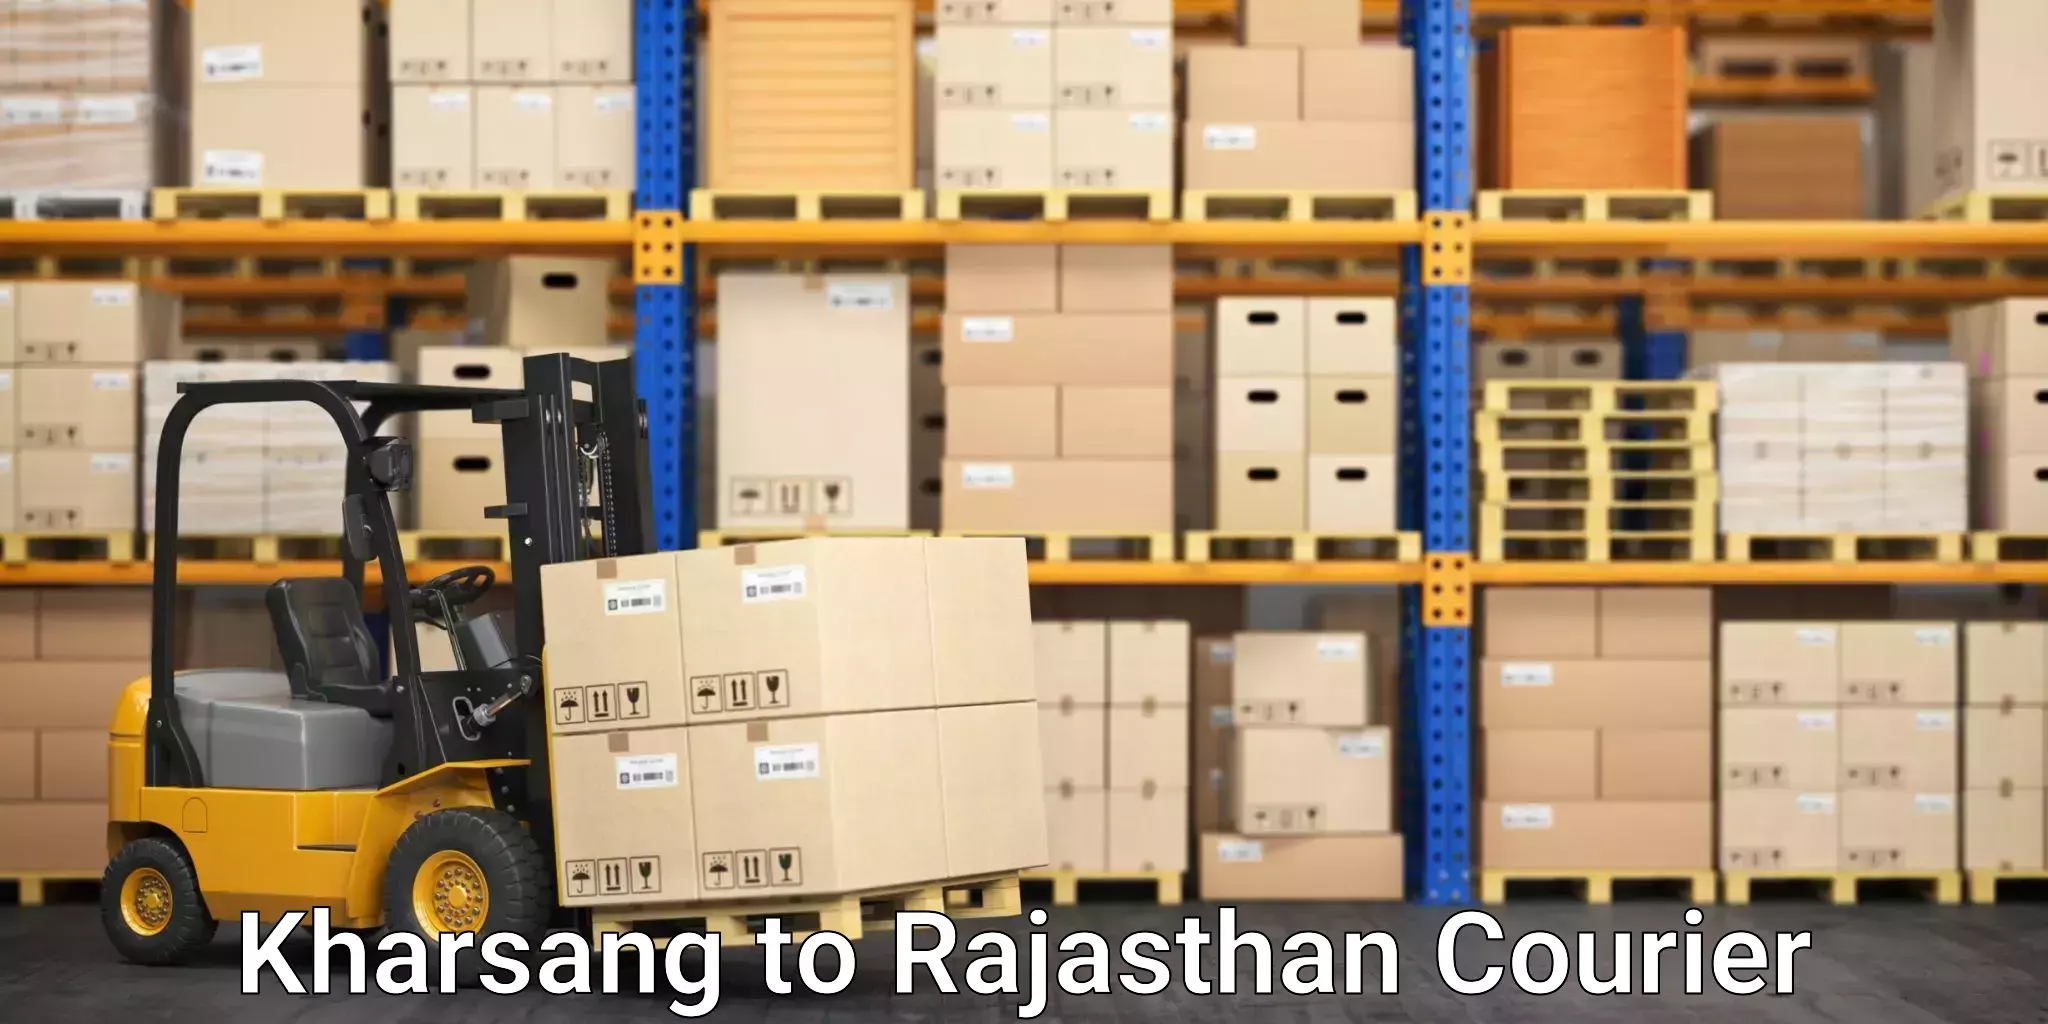 Express logistics service in Kharsang to Udaipur